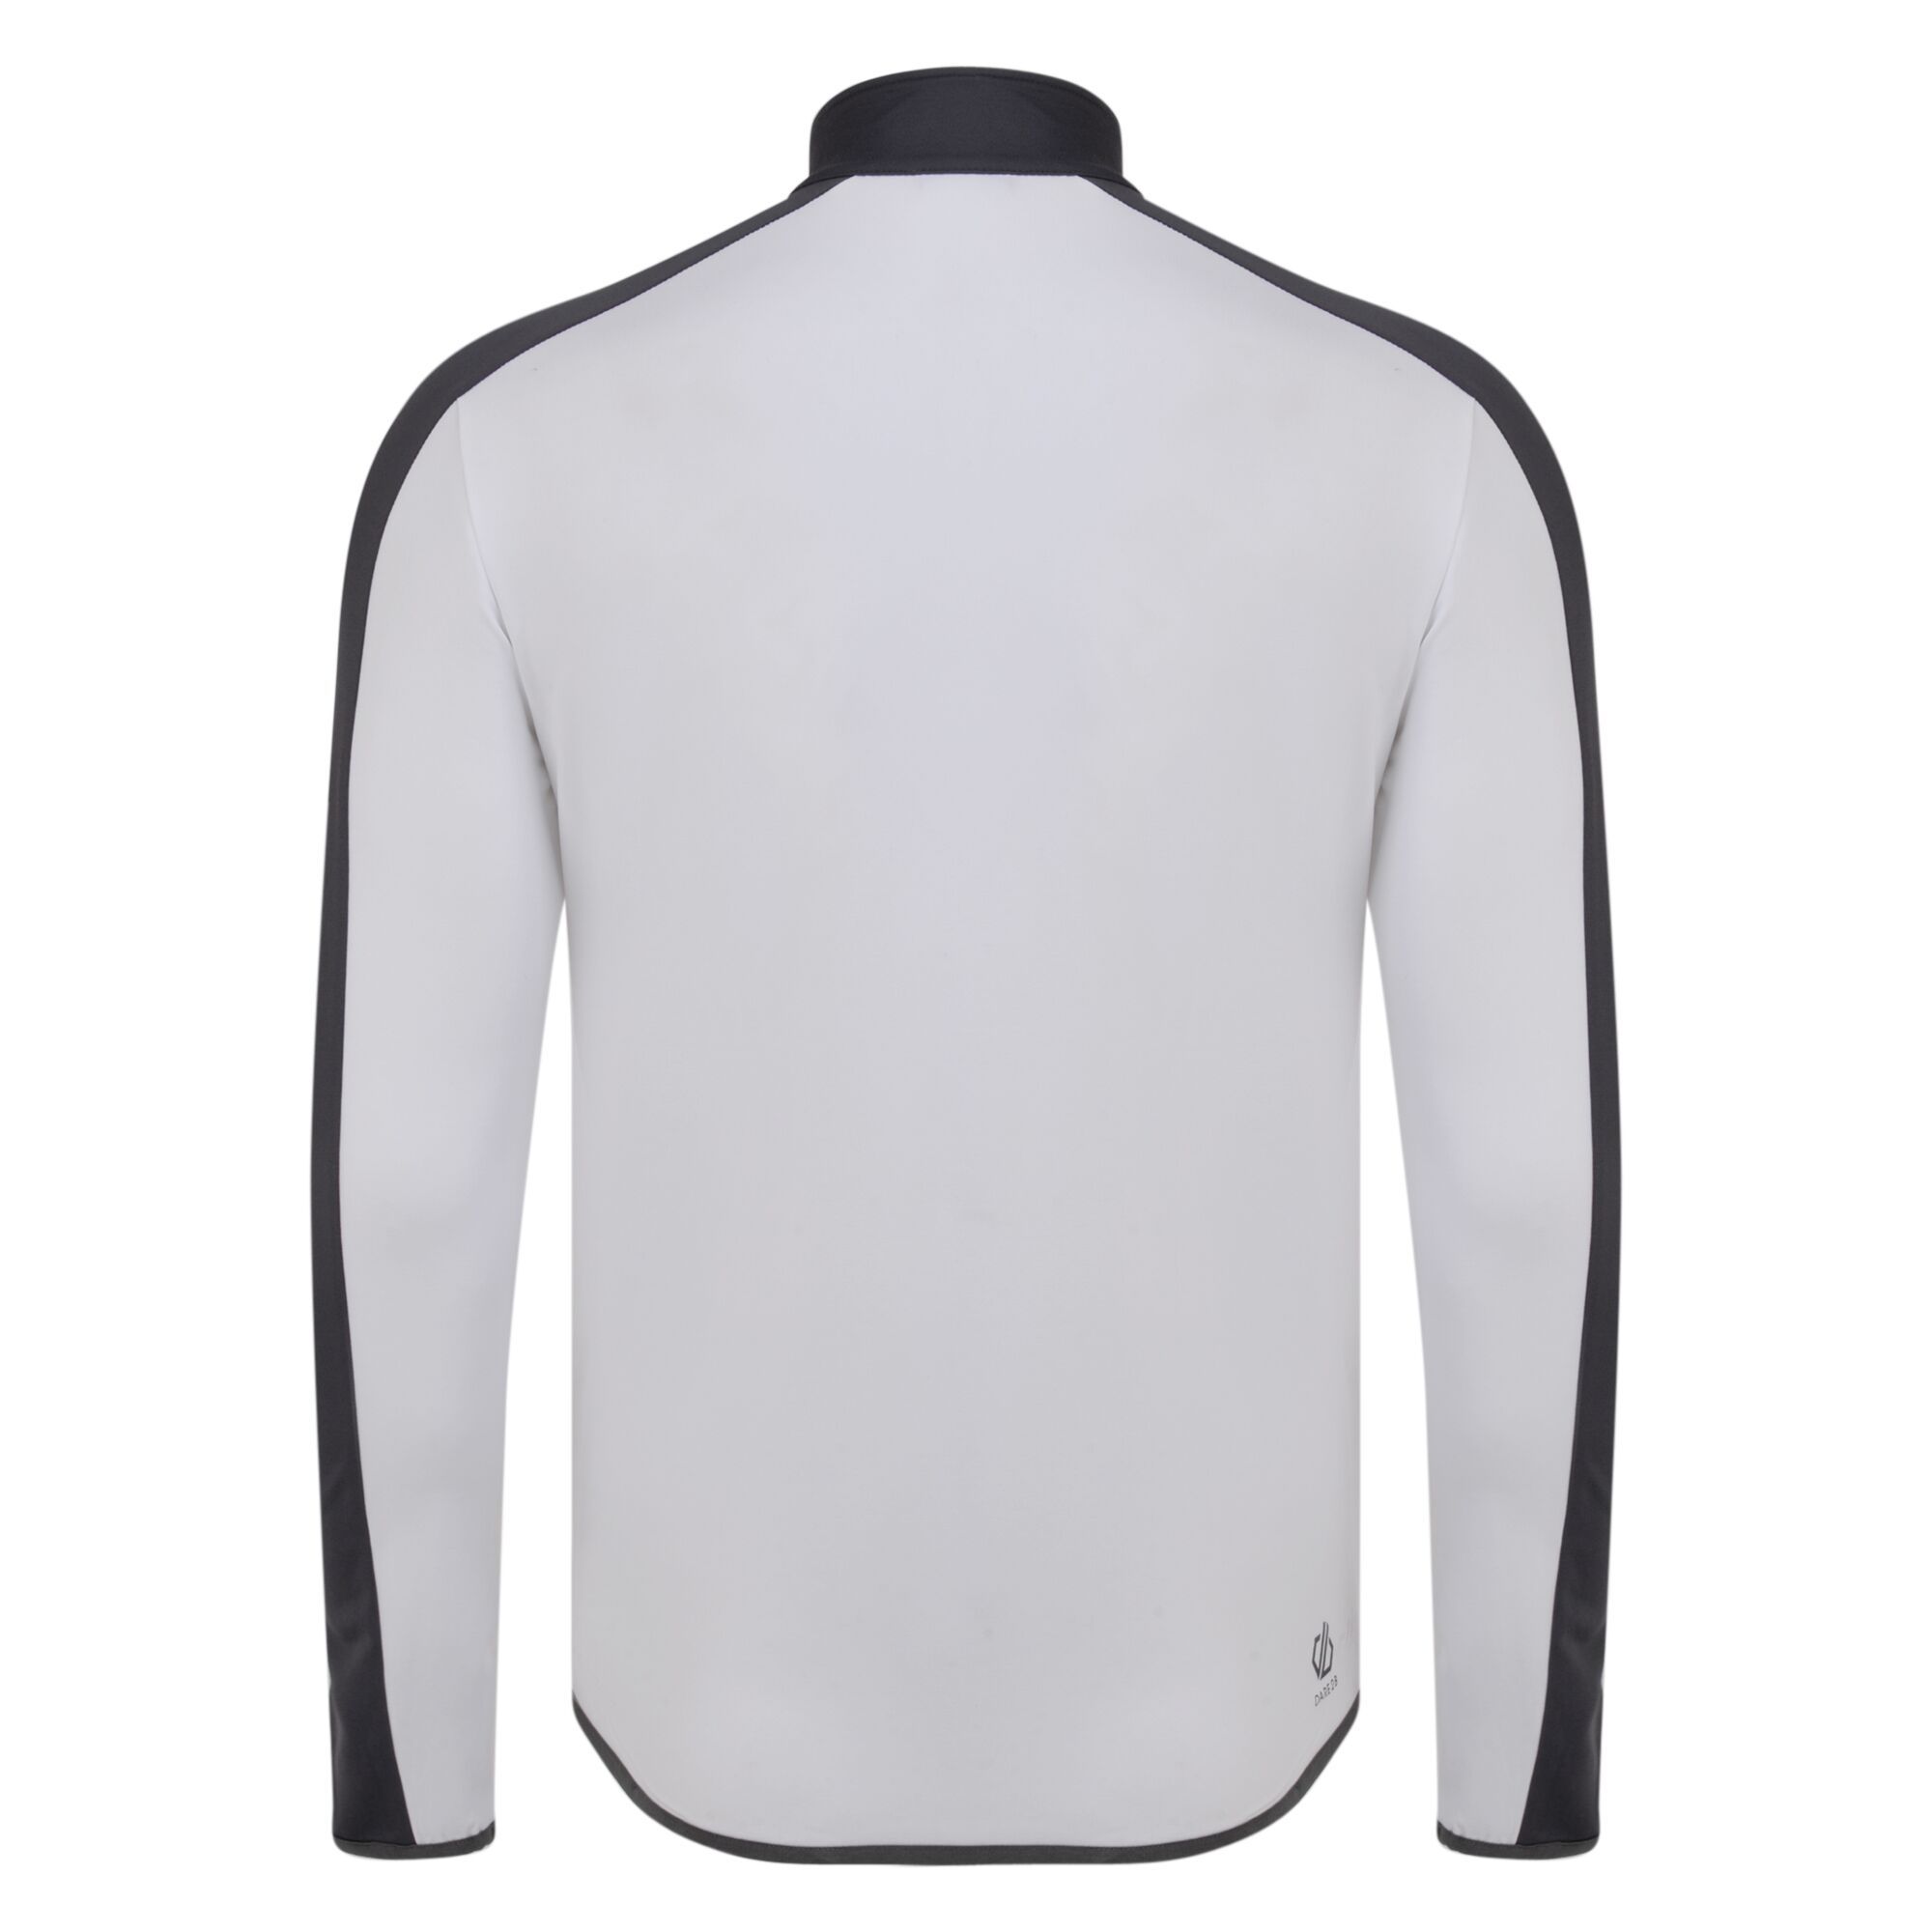 Elastane 3%, polyester 97%. Lightweight Ilus Core warm backed knitted stretch fabric. Quick drying. Half length zip with inner zip and chin guard.